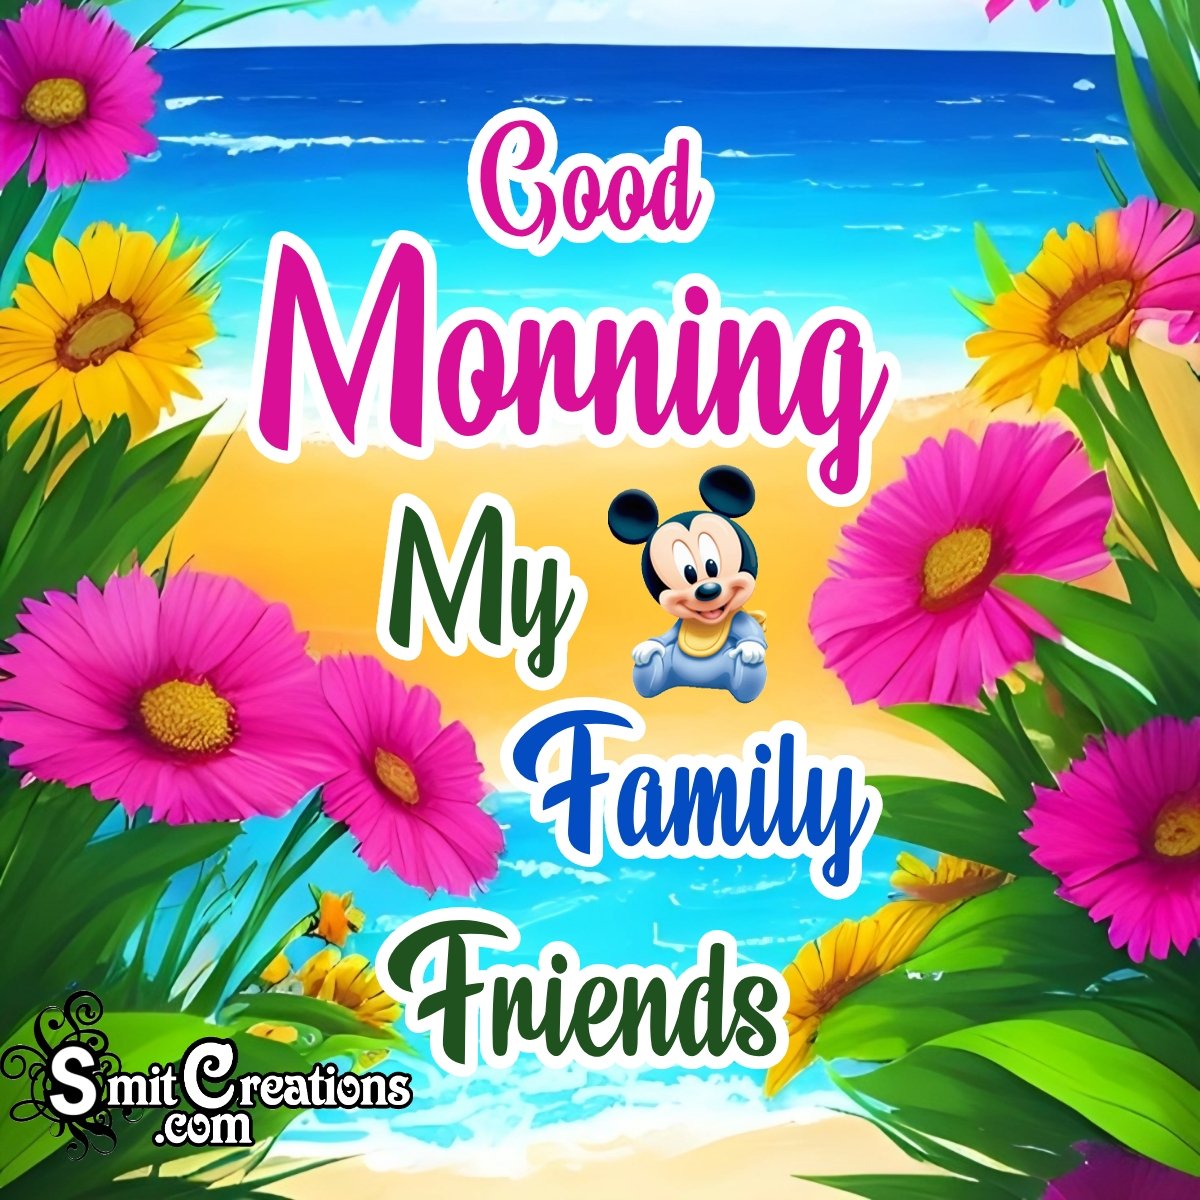 Good Morning My Family Friends